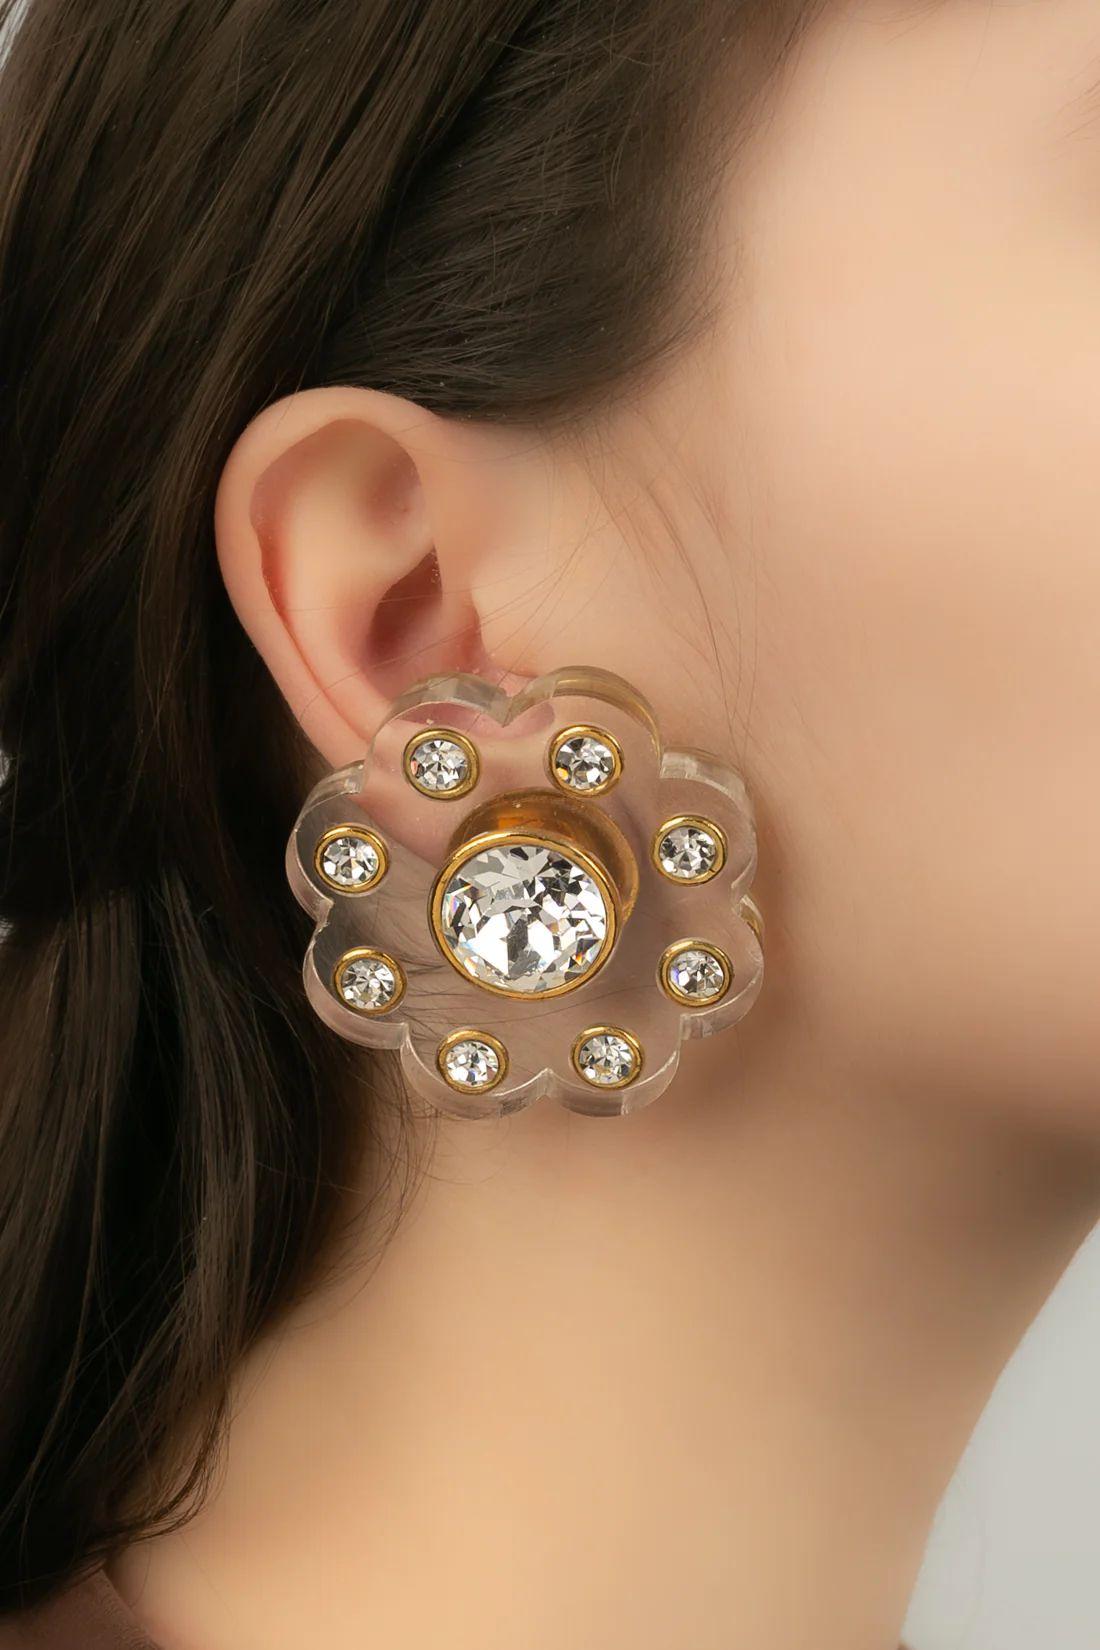 Chanel Earrings in lucite and strass For Sale 2